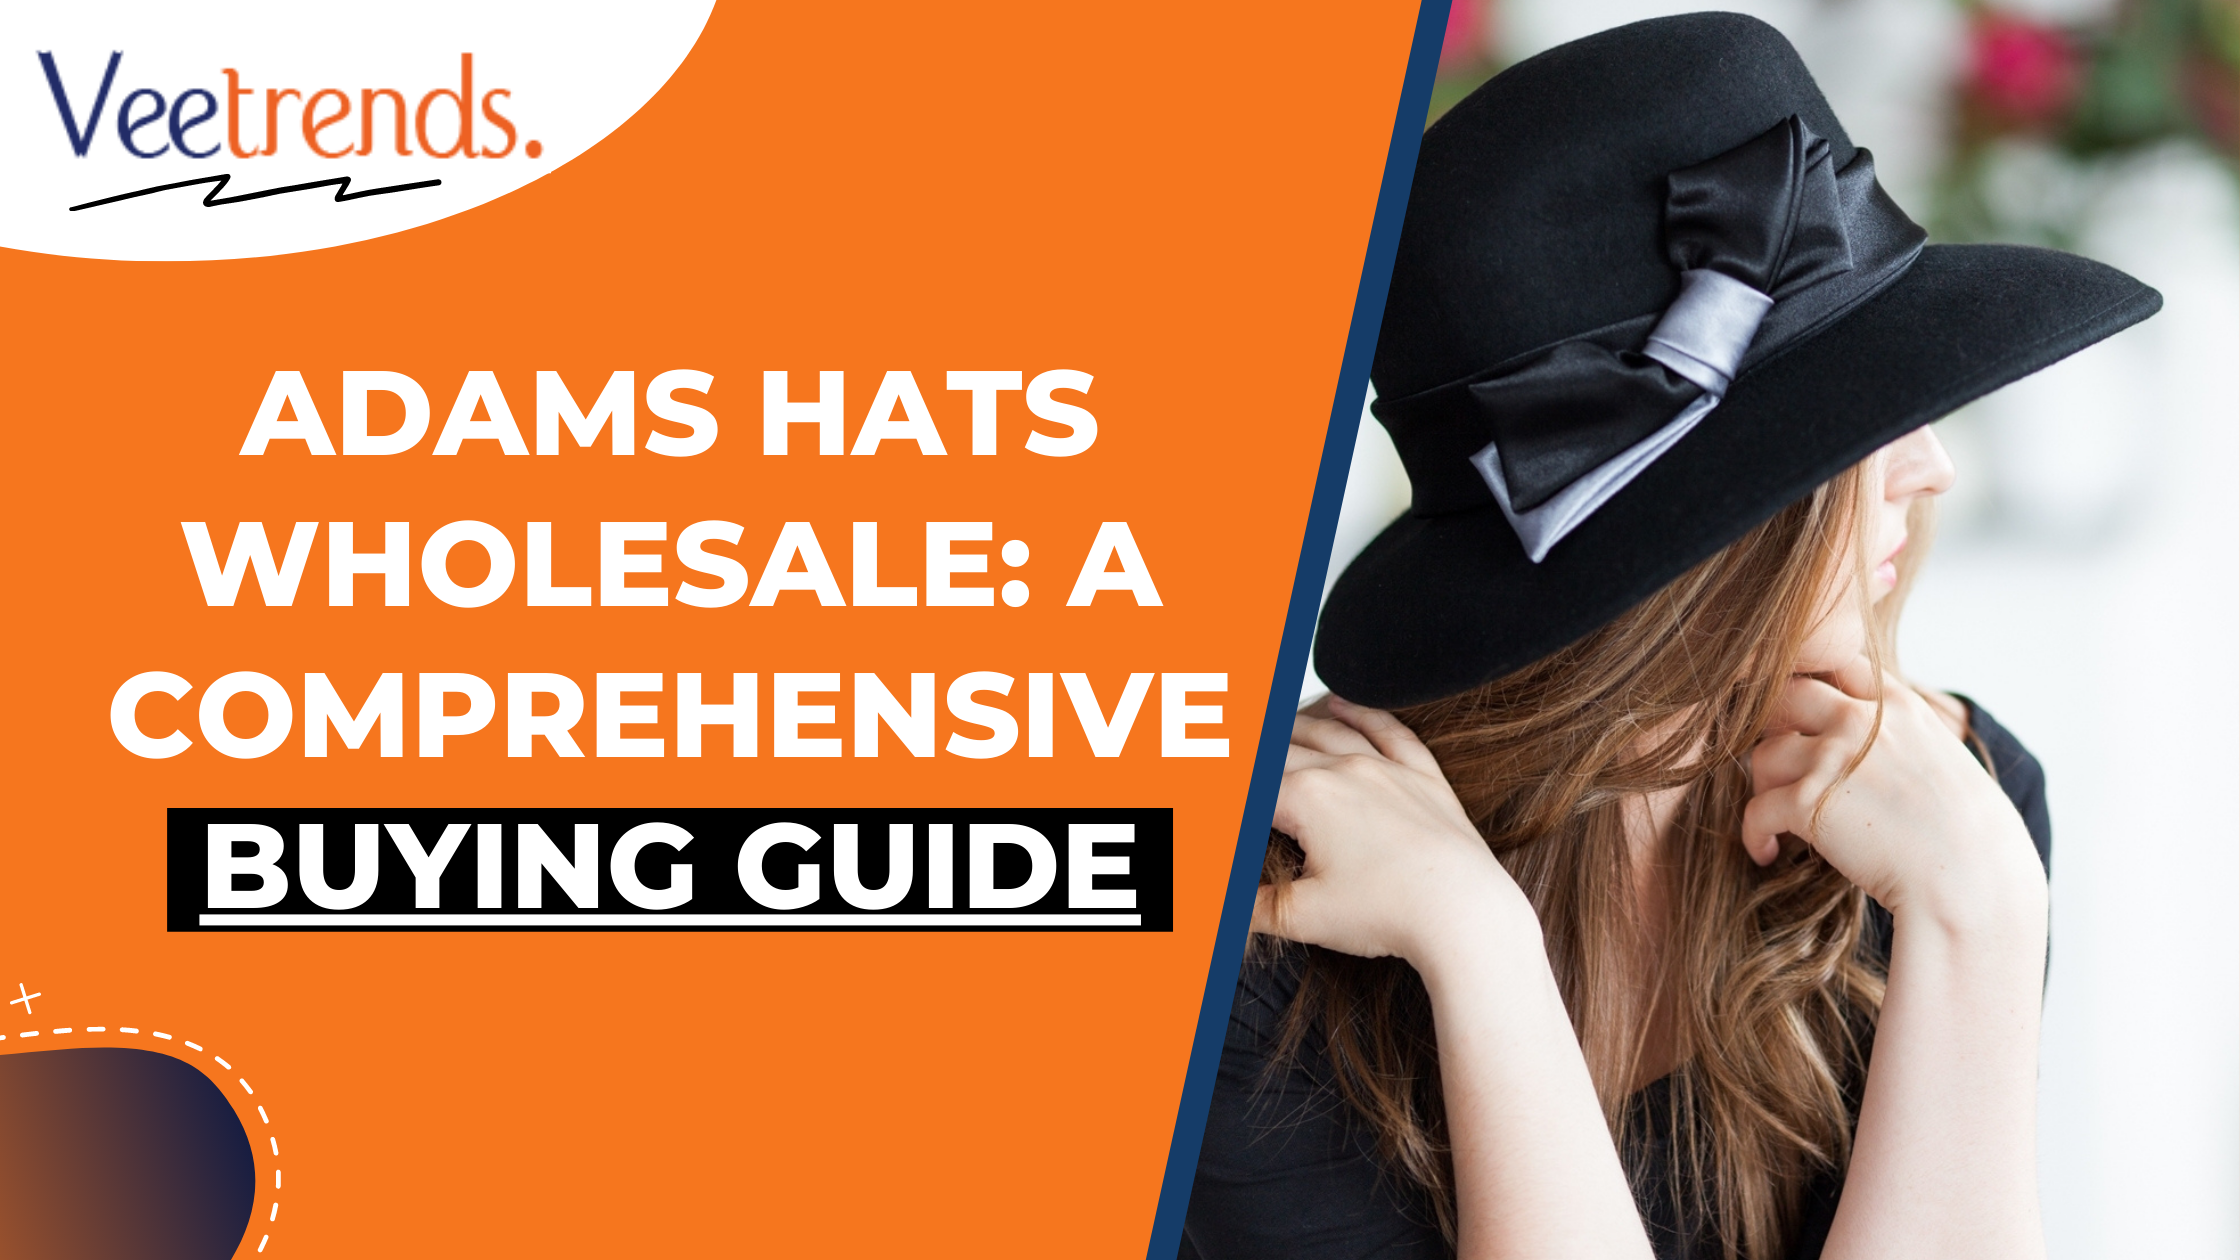 Adams Hats Wholesale: A Comprehensive Buying Guide